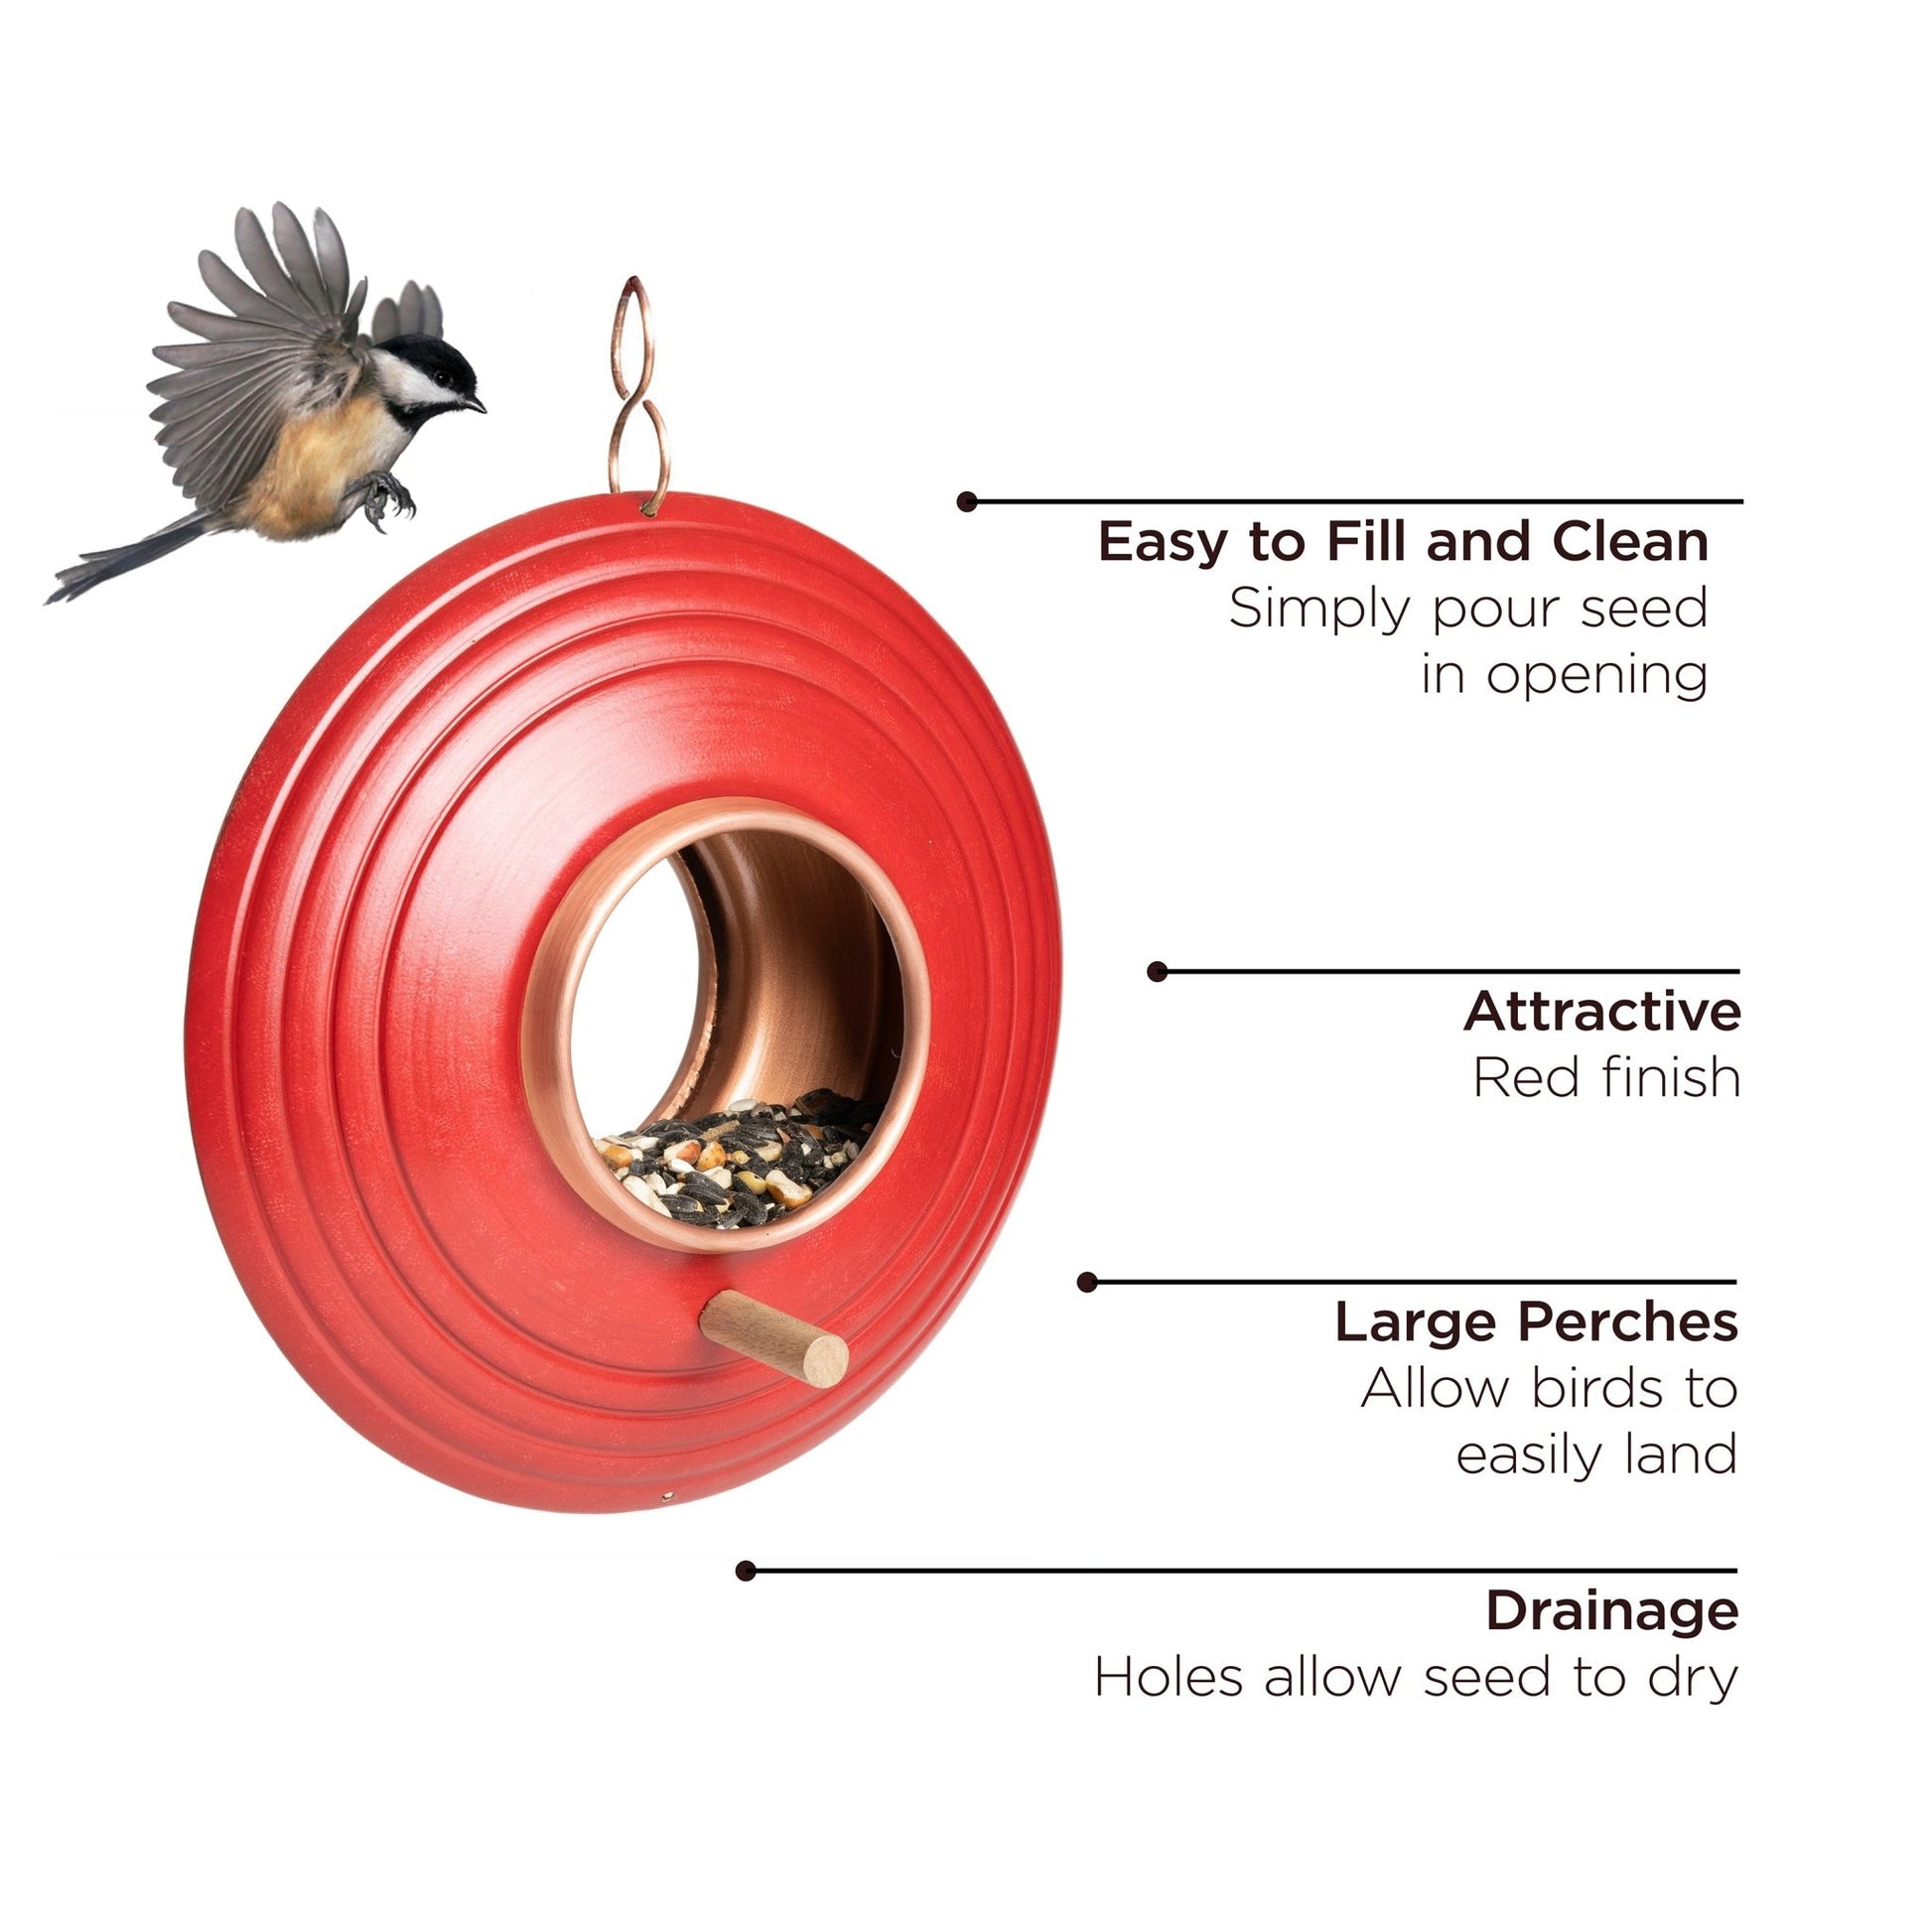 Mojave Fly Thru ™ Bird Feeder, Copper Accents, Multiple Perches - Good Directions